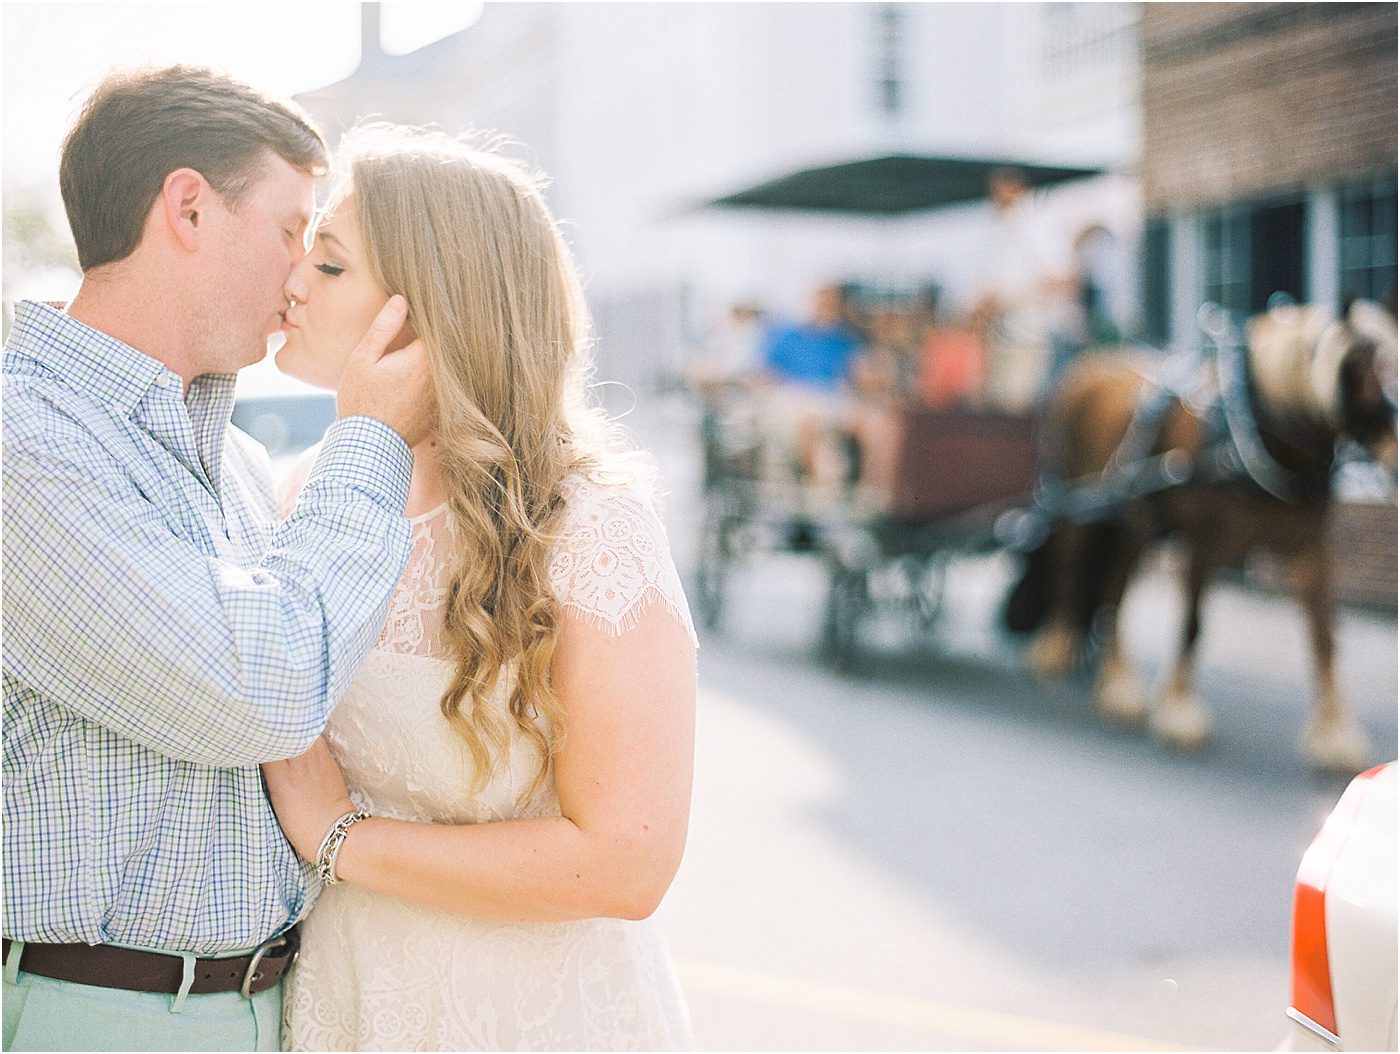 Creative engagement picture with horse and carriage in the background downtown Charleston SC